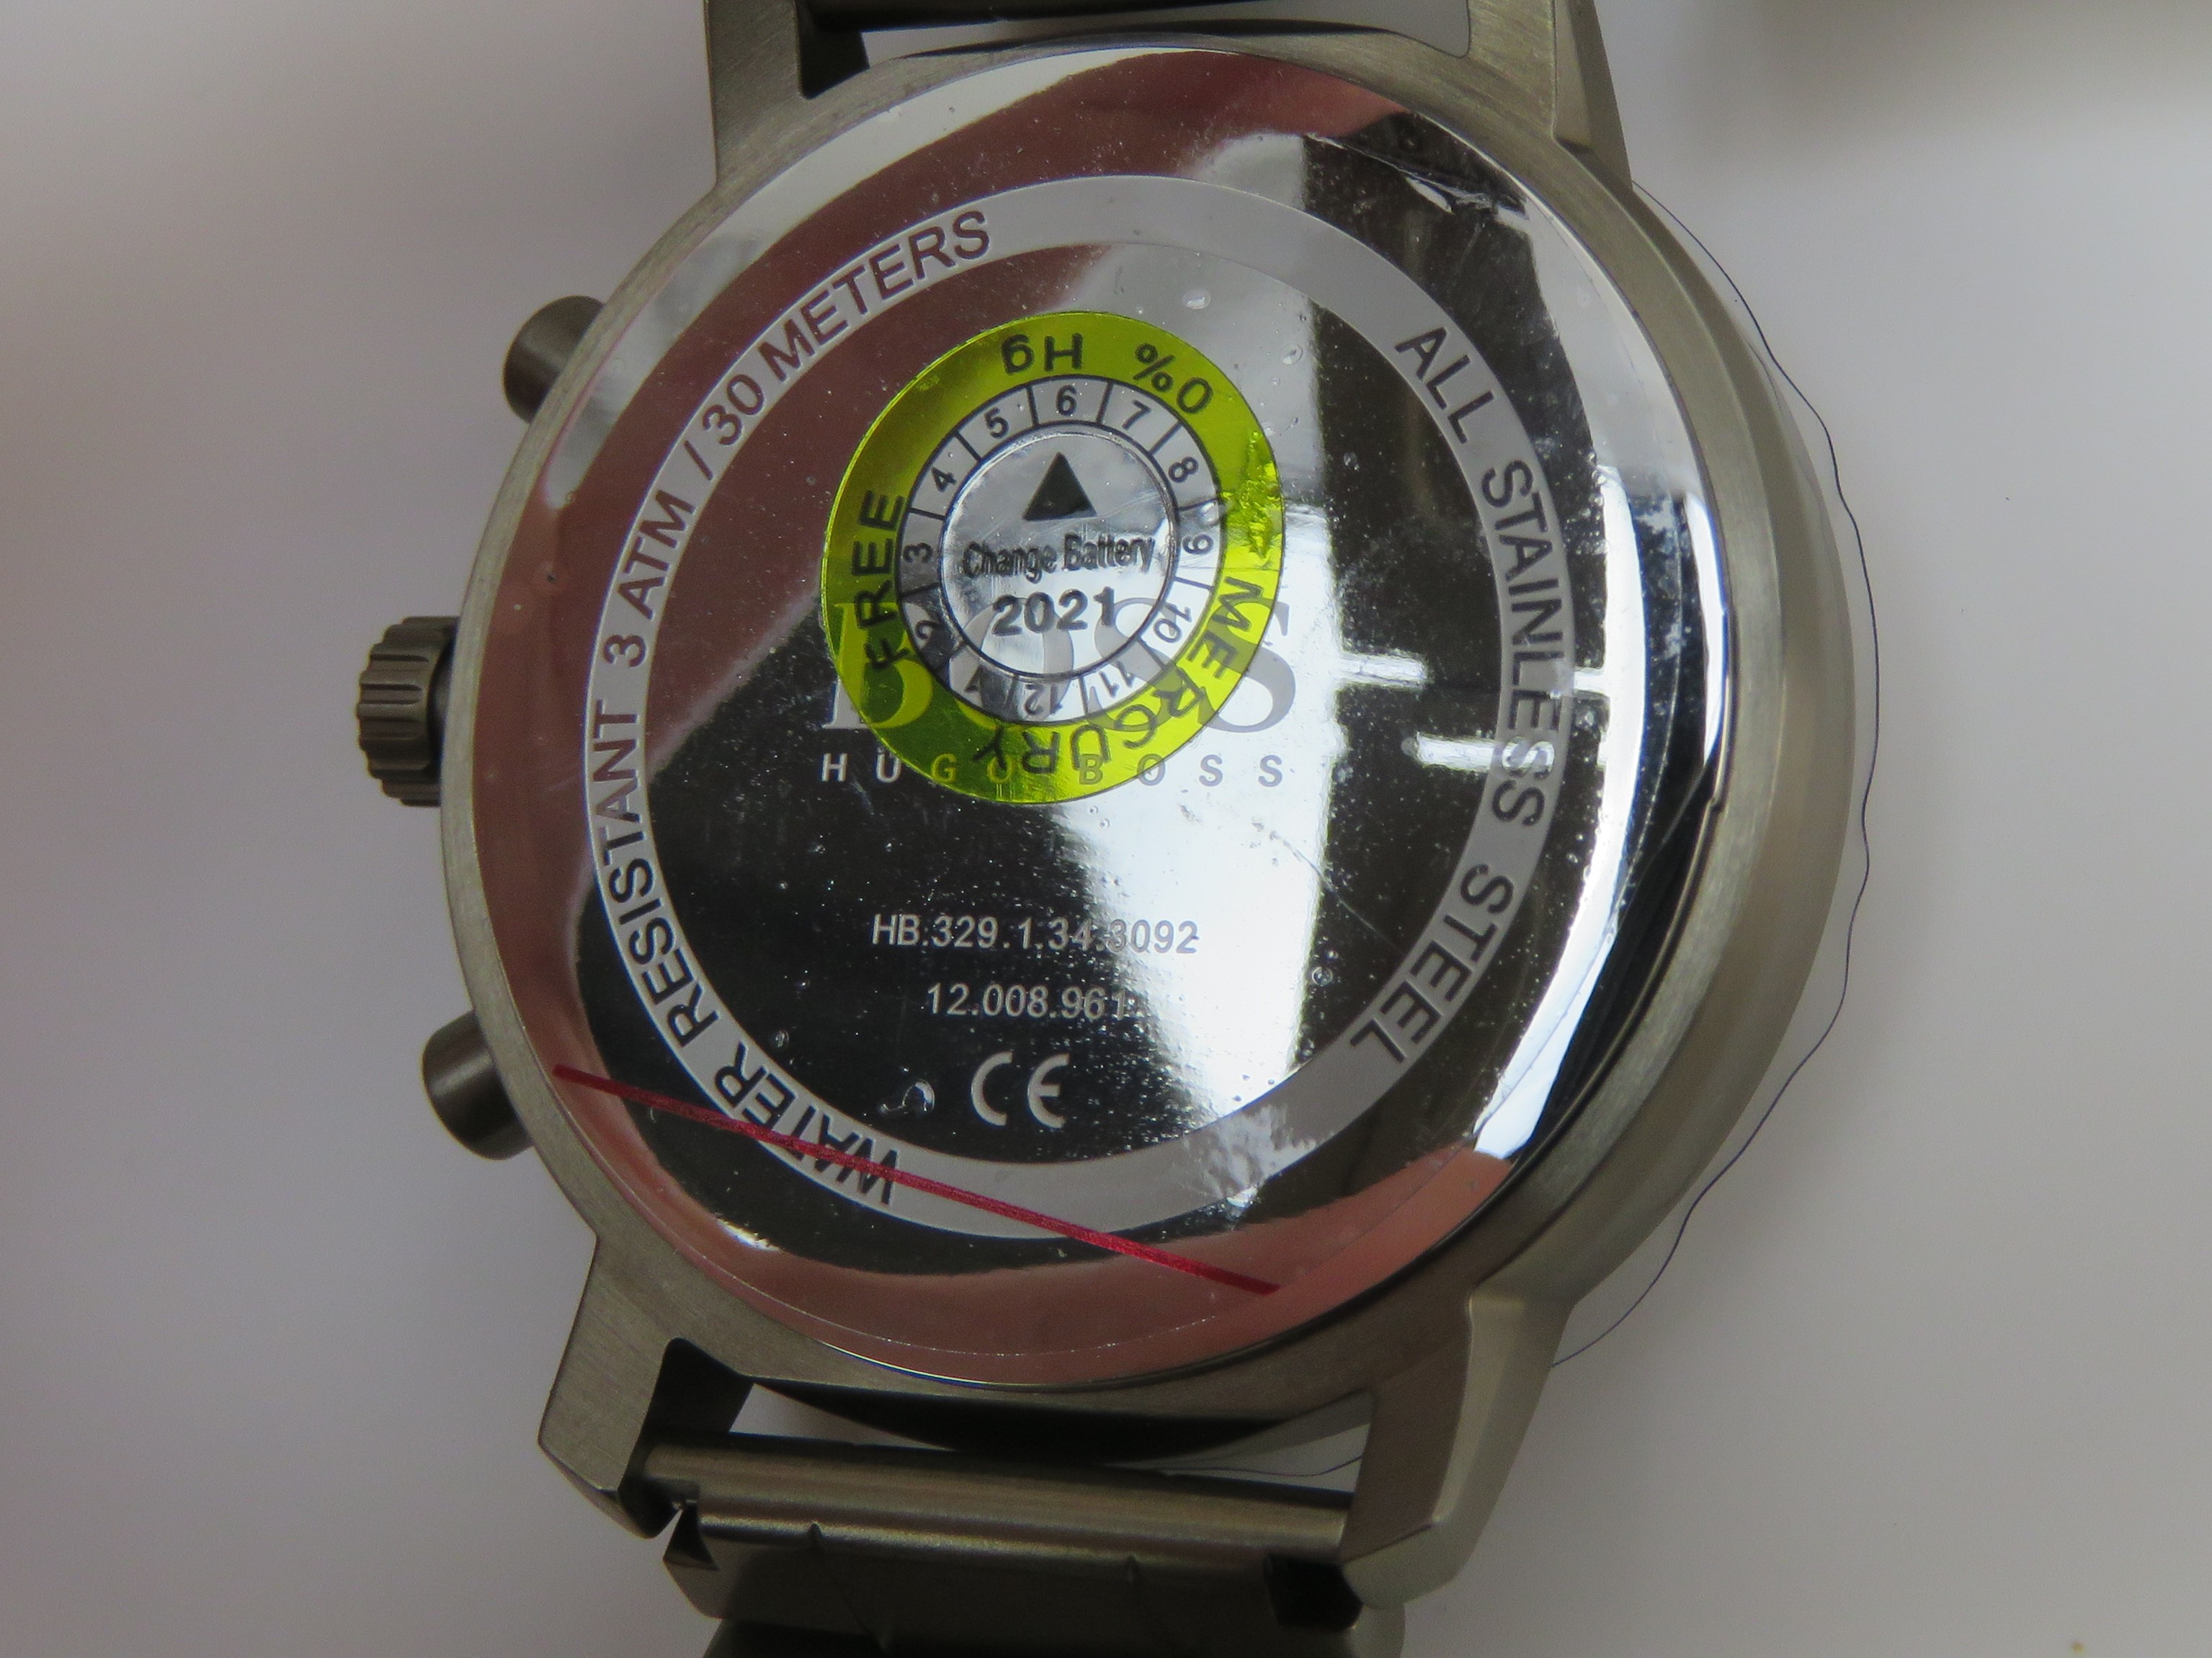 A Hugo Boss stainless steel wristwatch in as new condition complete with box and papers, - Image 6 of 9